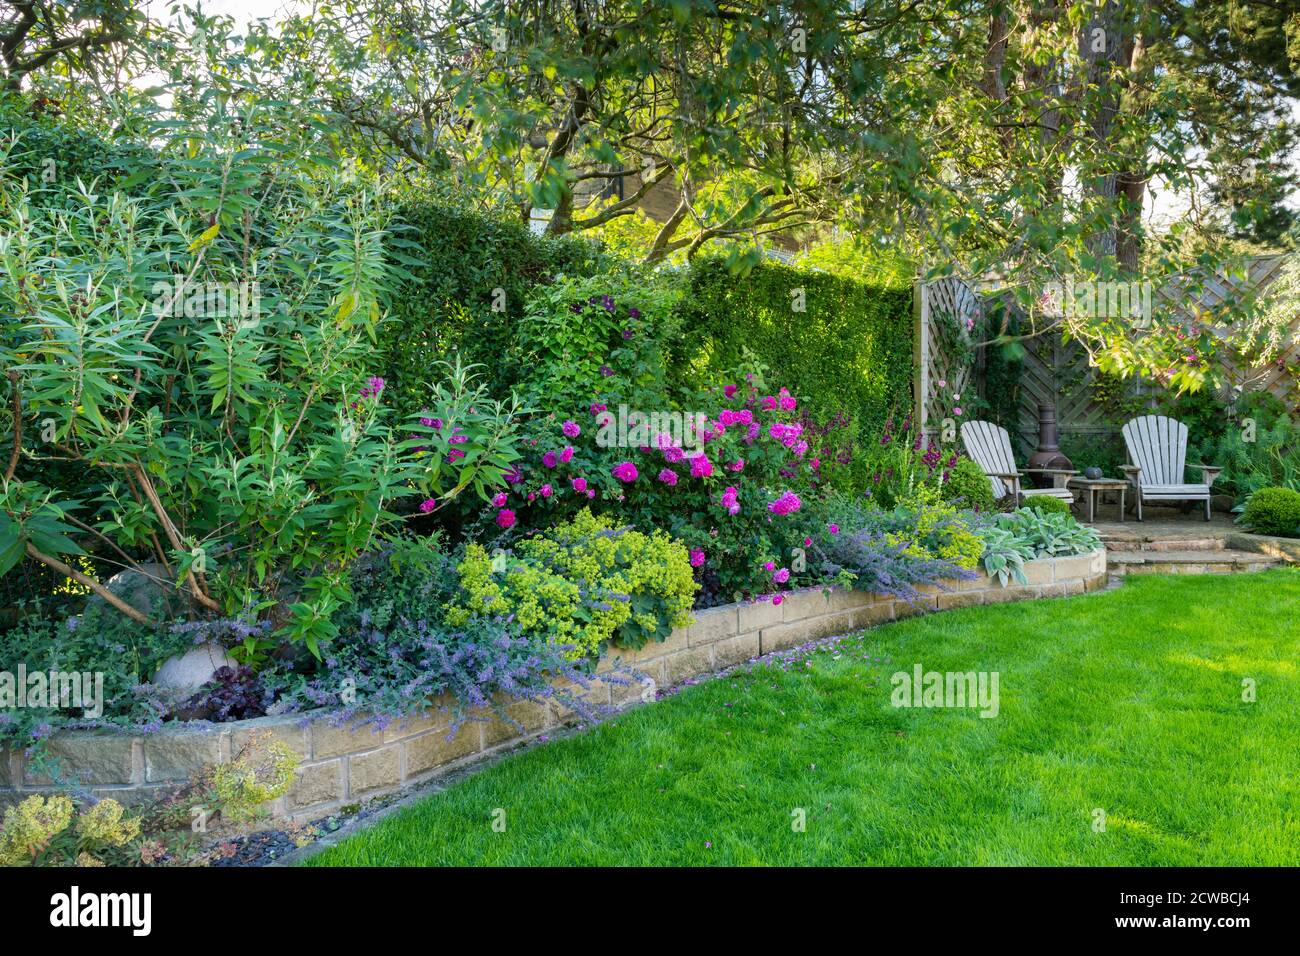 Landscaped sunny private garden (contemporary design, colourful summer flowers, border plants, patio furniture seating, lawn) - Yorkshire, England, UK Stock Photo